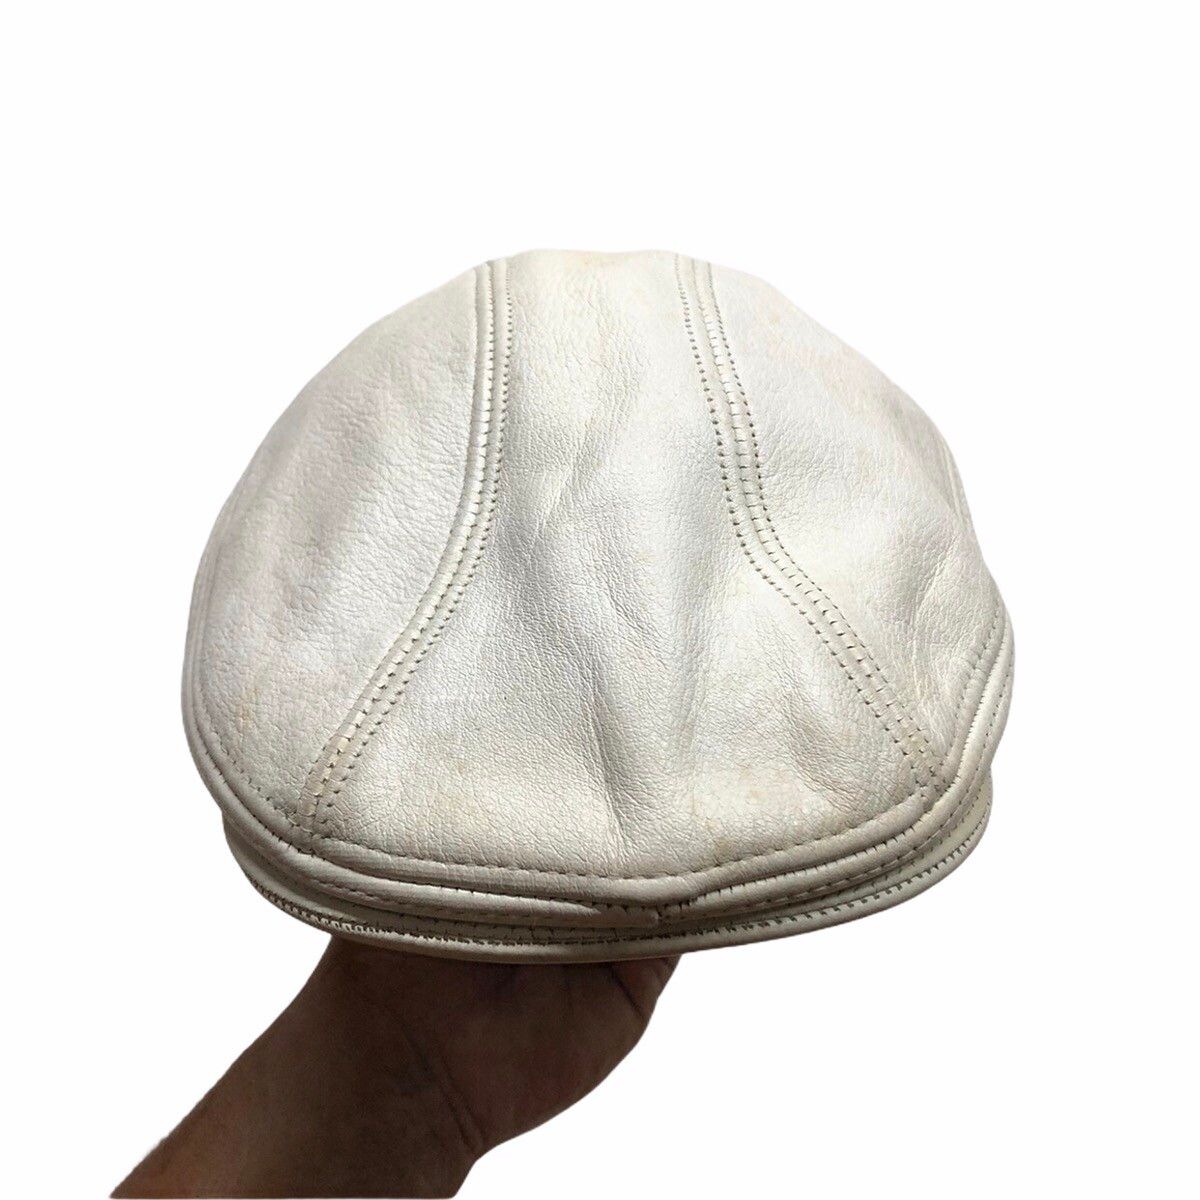 Vintage New York Hat Co. Beret Hat, White Leather Hats Caps Size ONE SIZE - 1 Preview